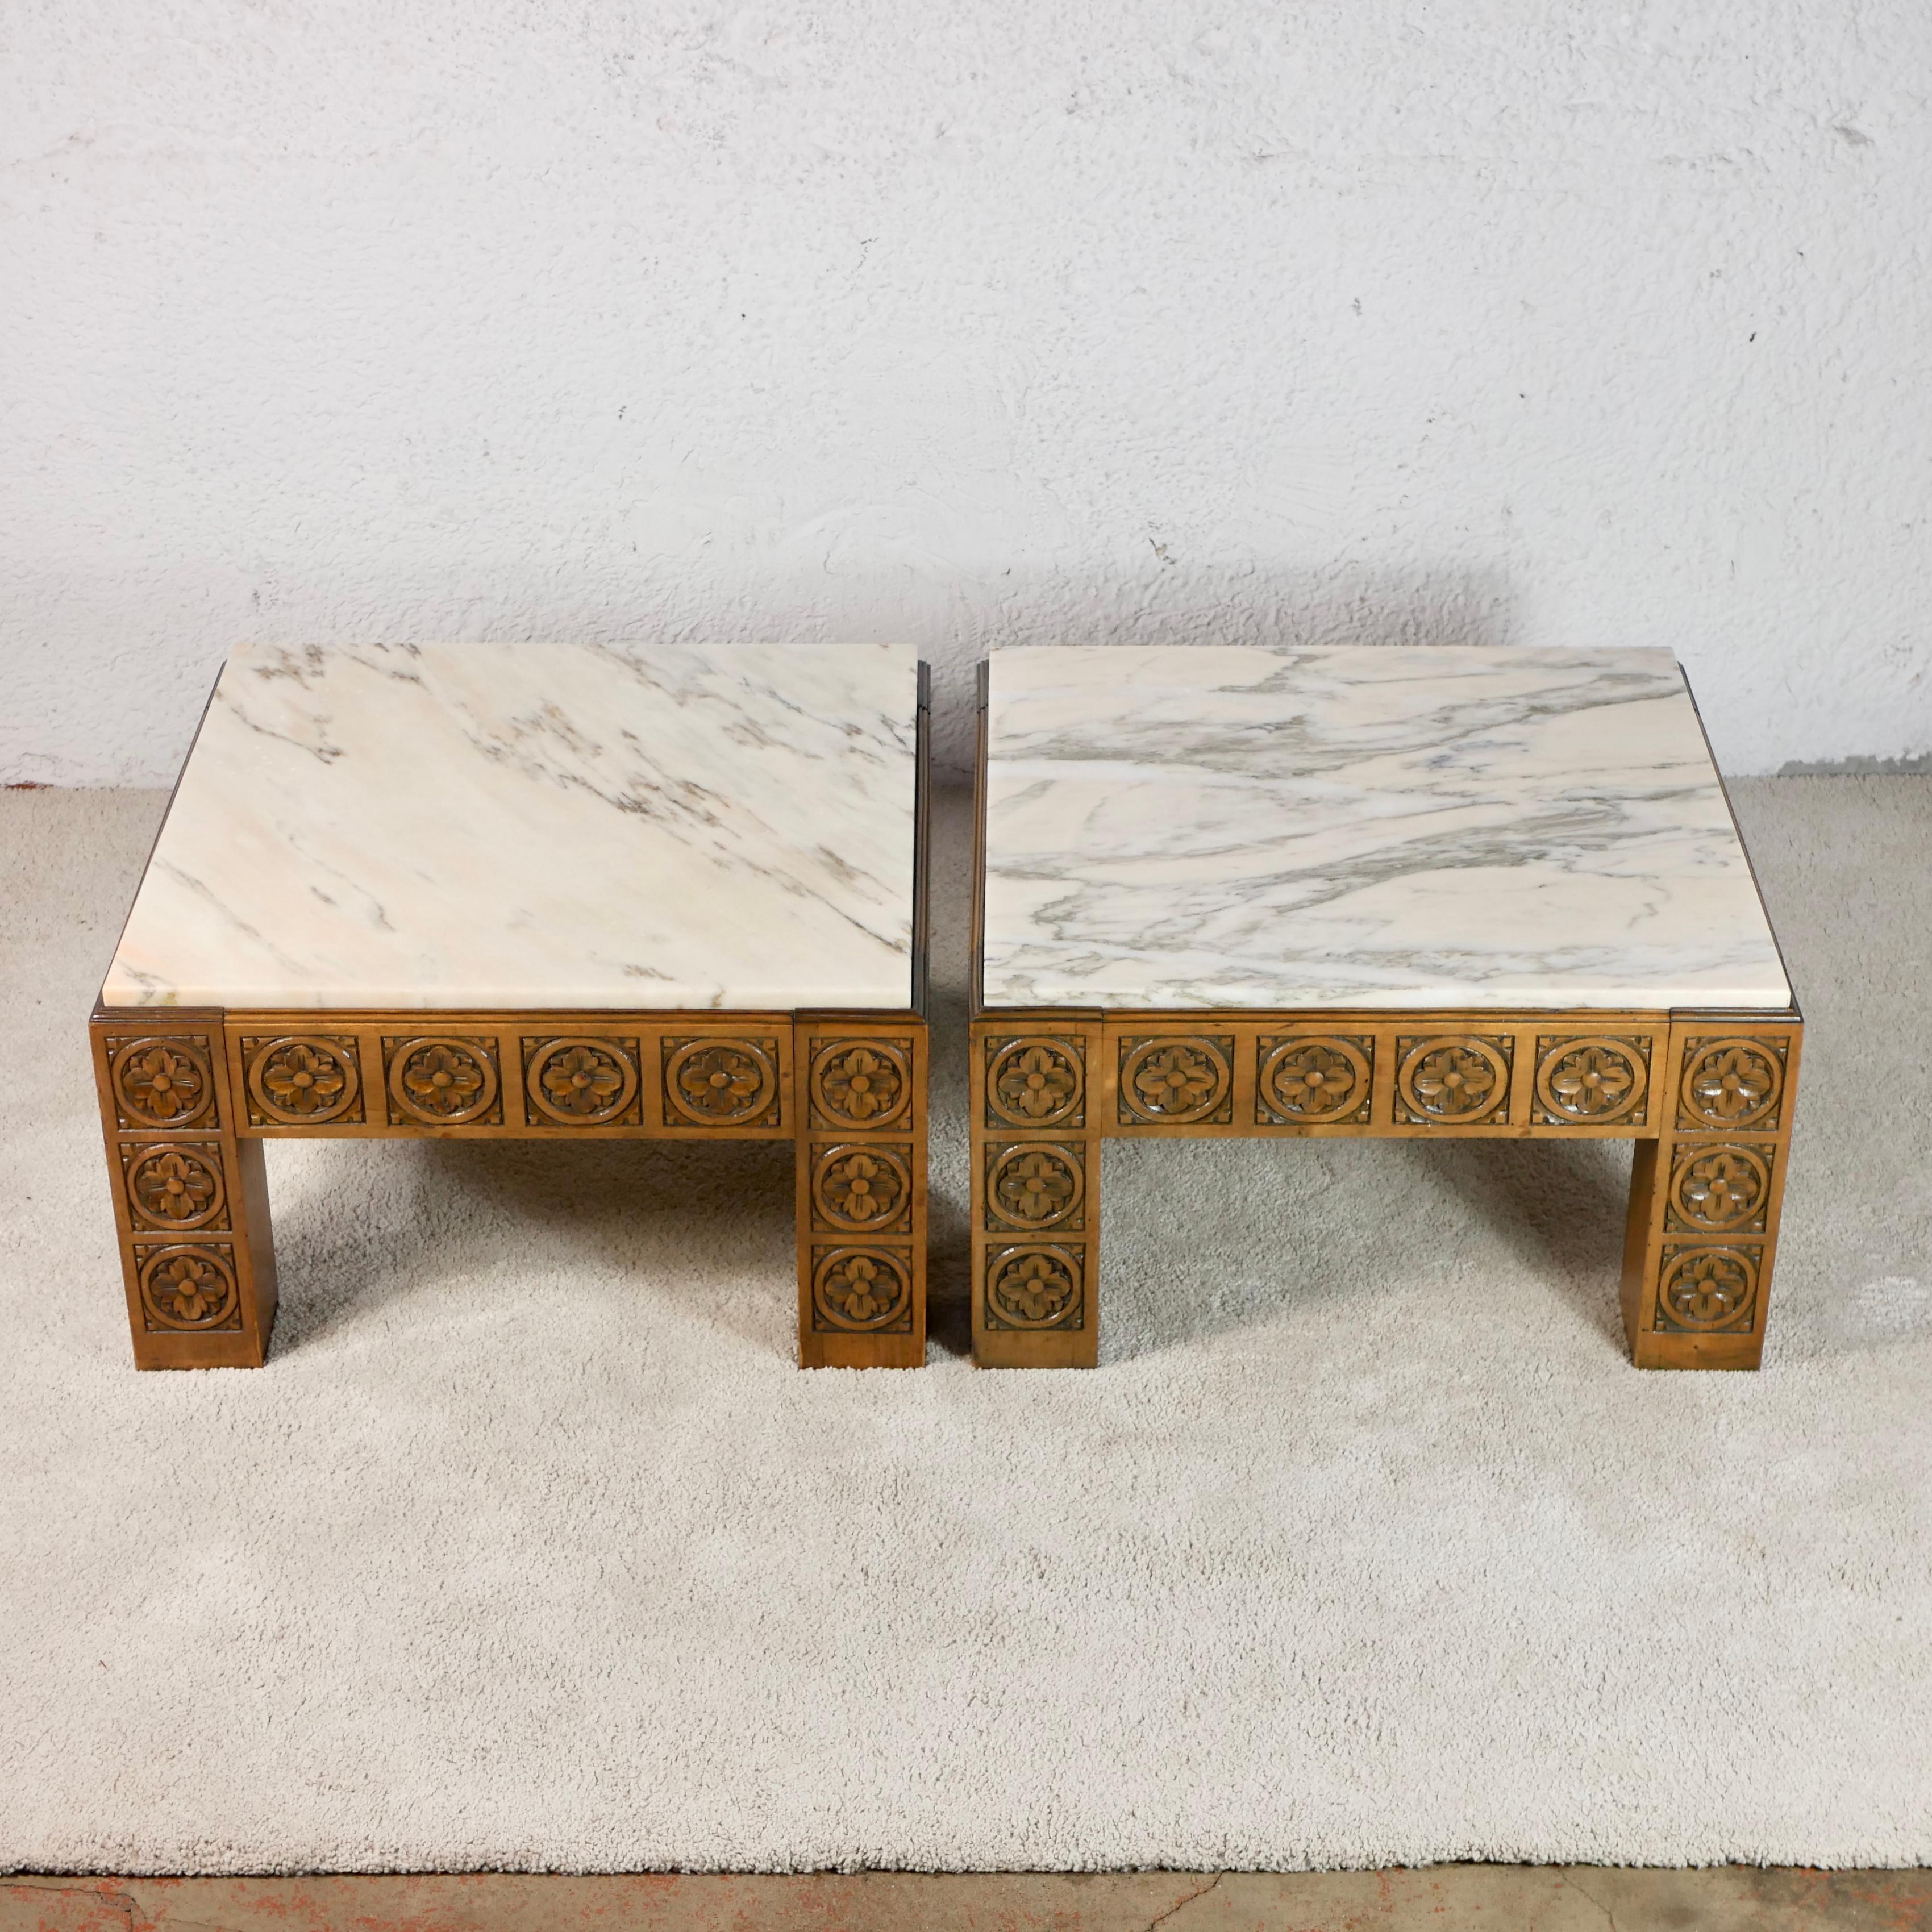 Midcentury Square Carved Wood and Marble Coffee Table from Spain 12